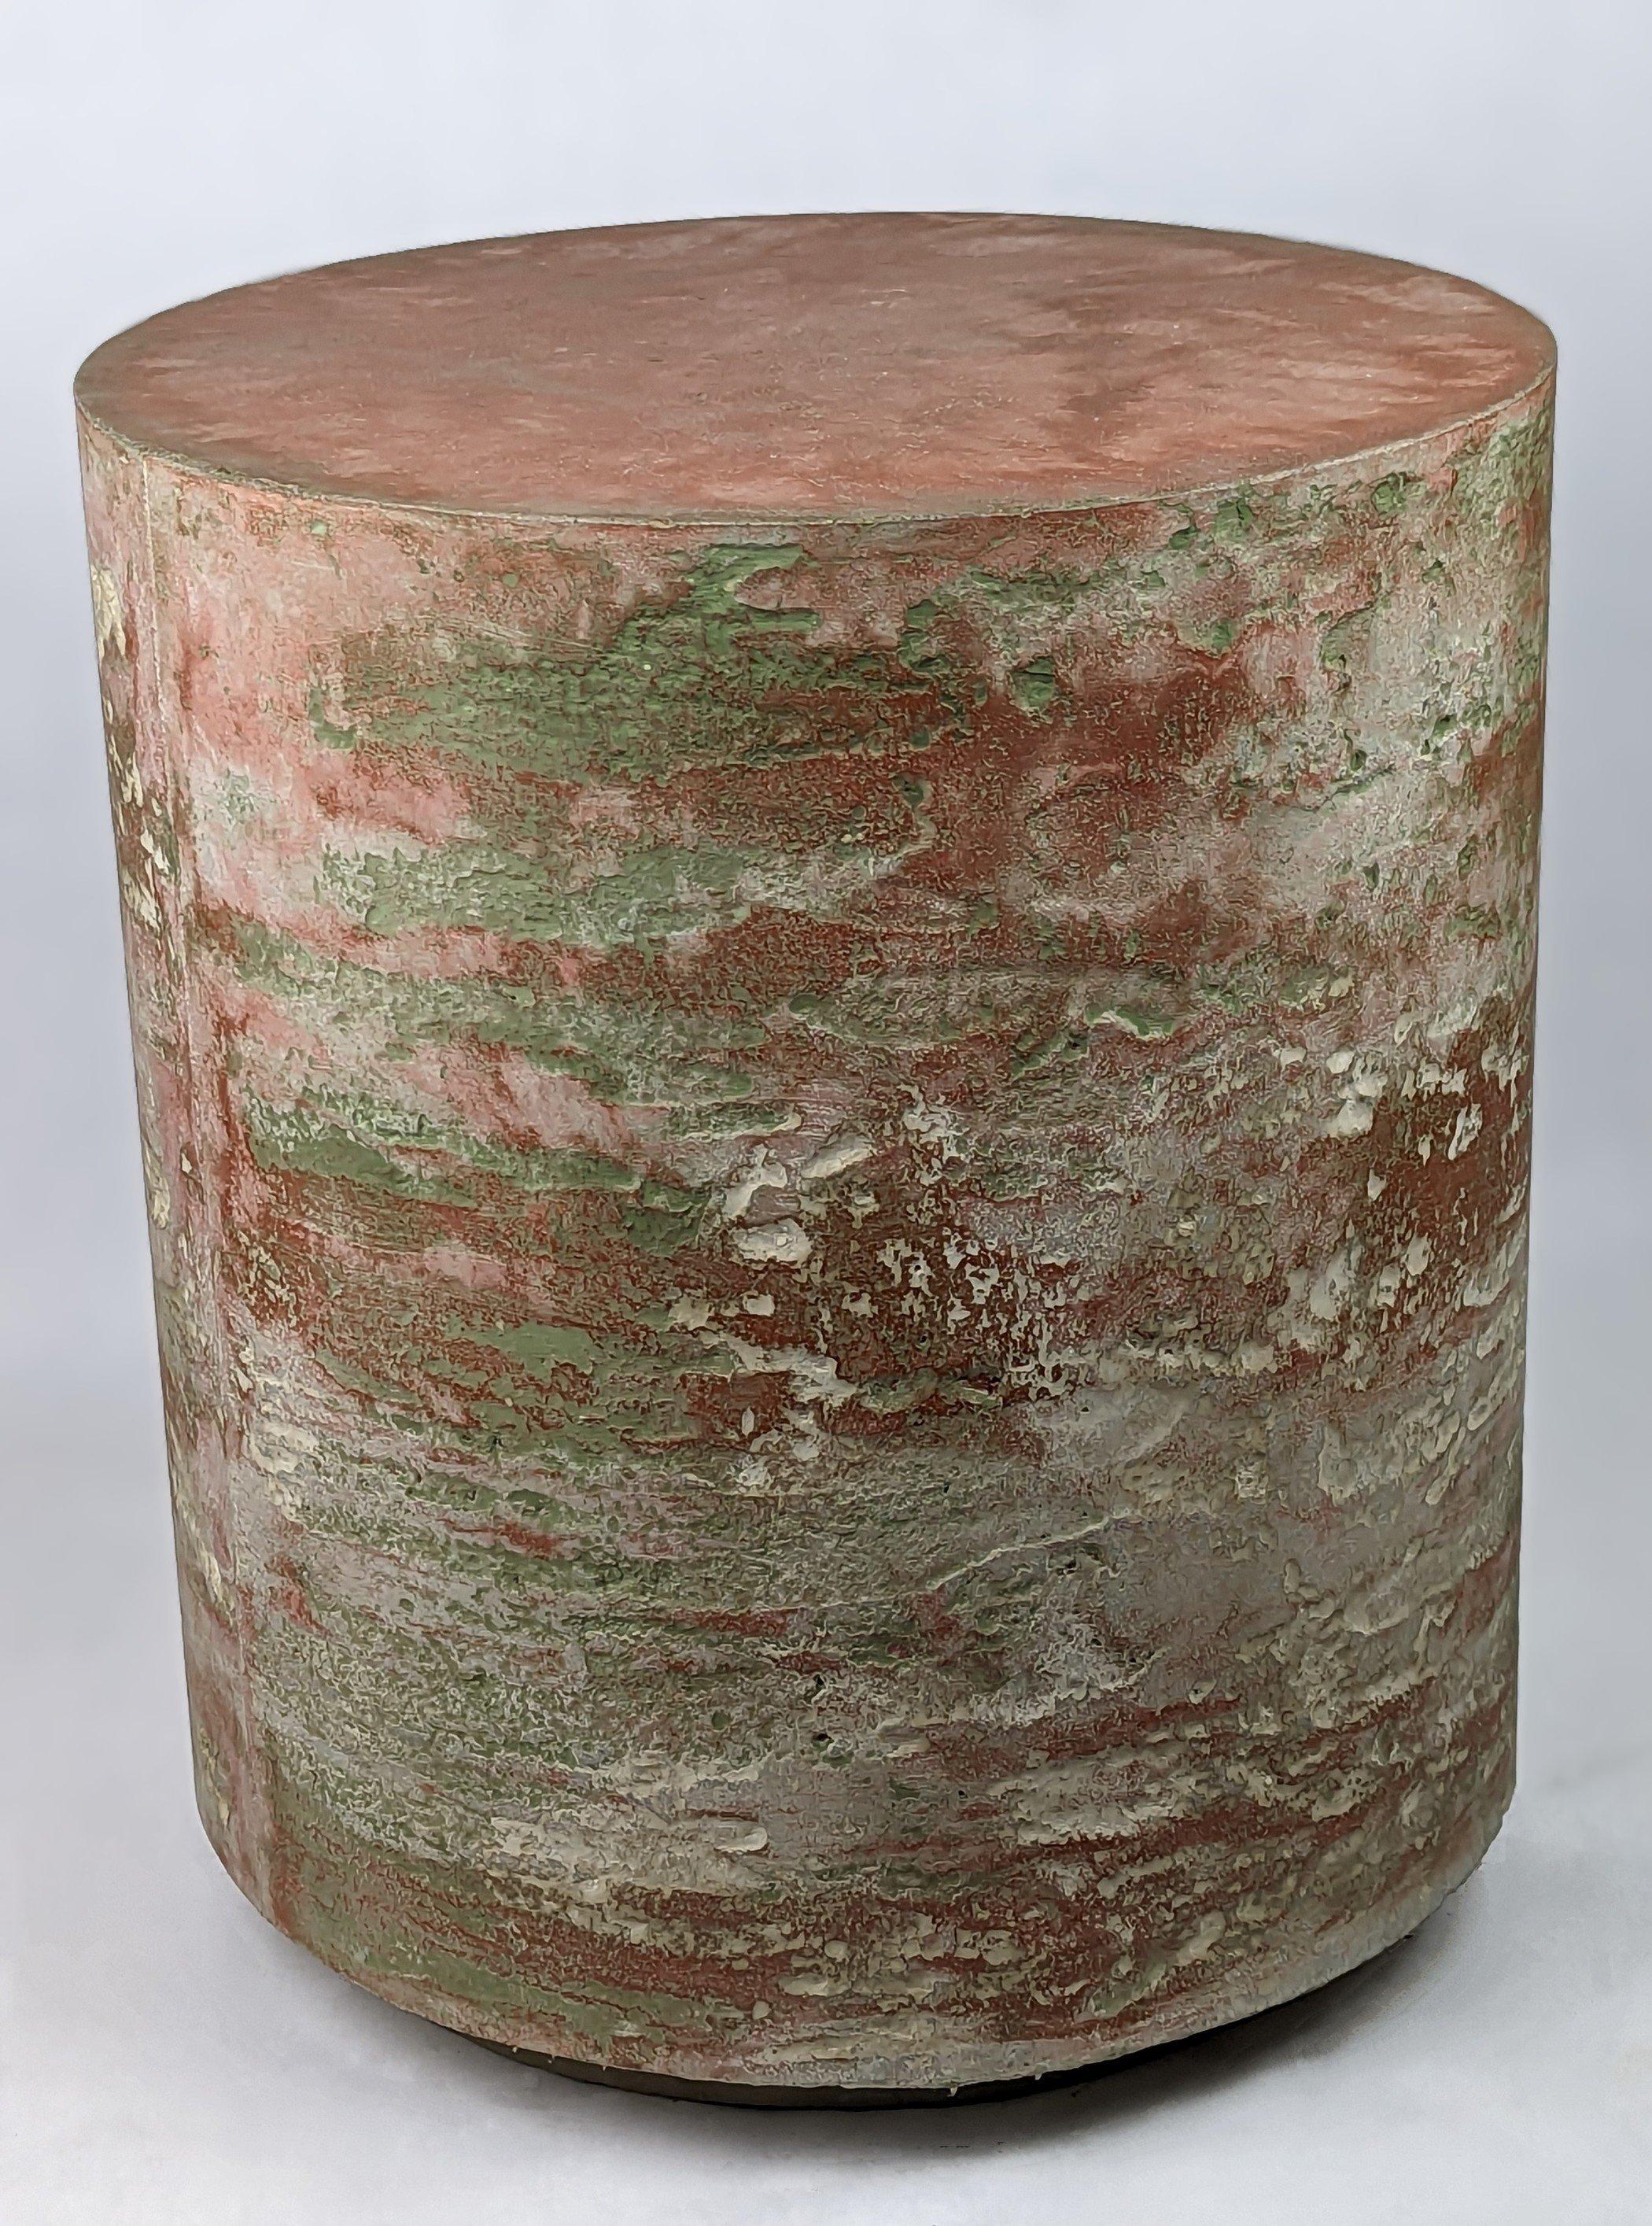 Other Geological Light MTO Red and Green Concrete Art Stool, 'Lichen on Mars' For Sale